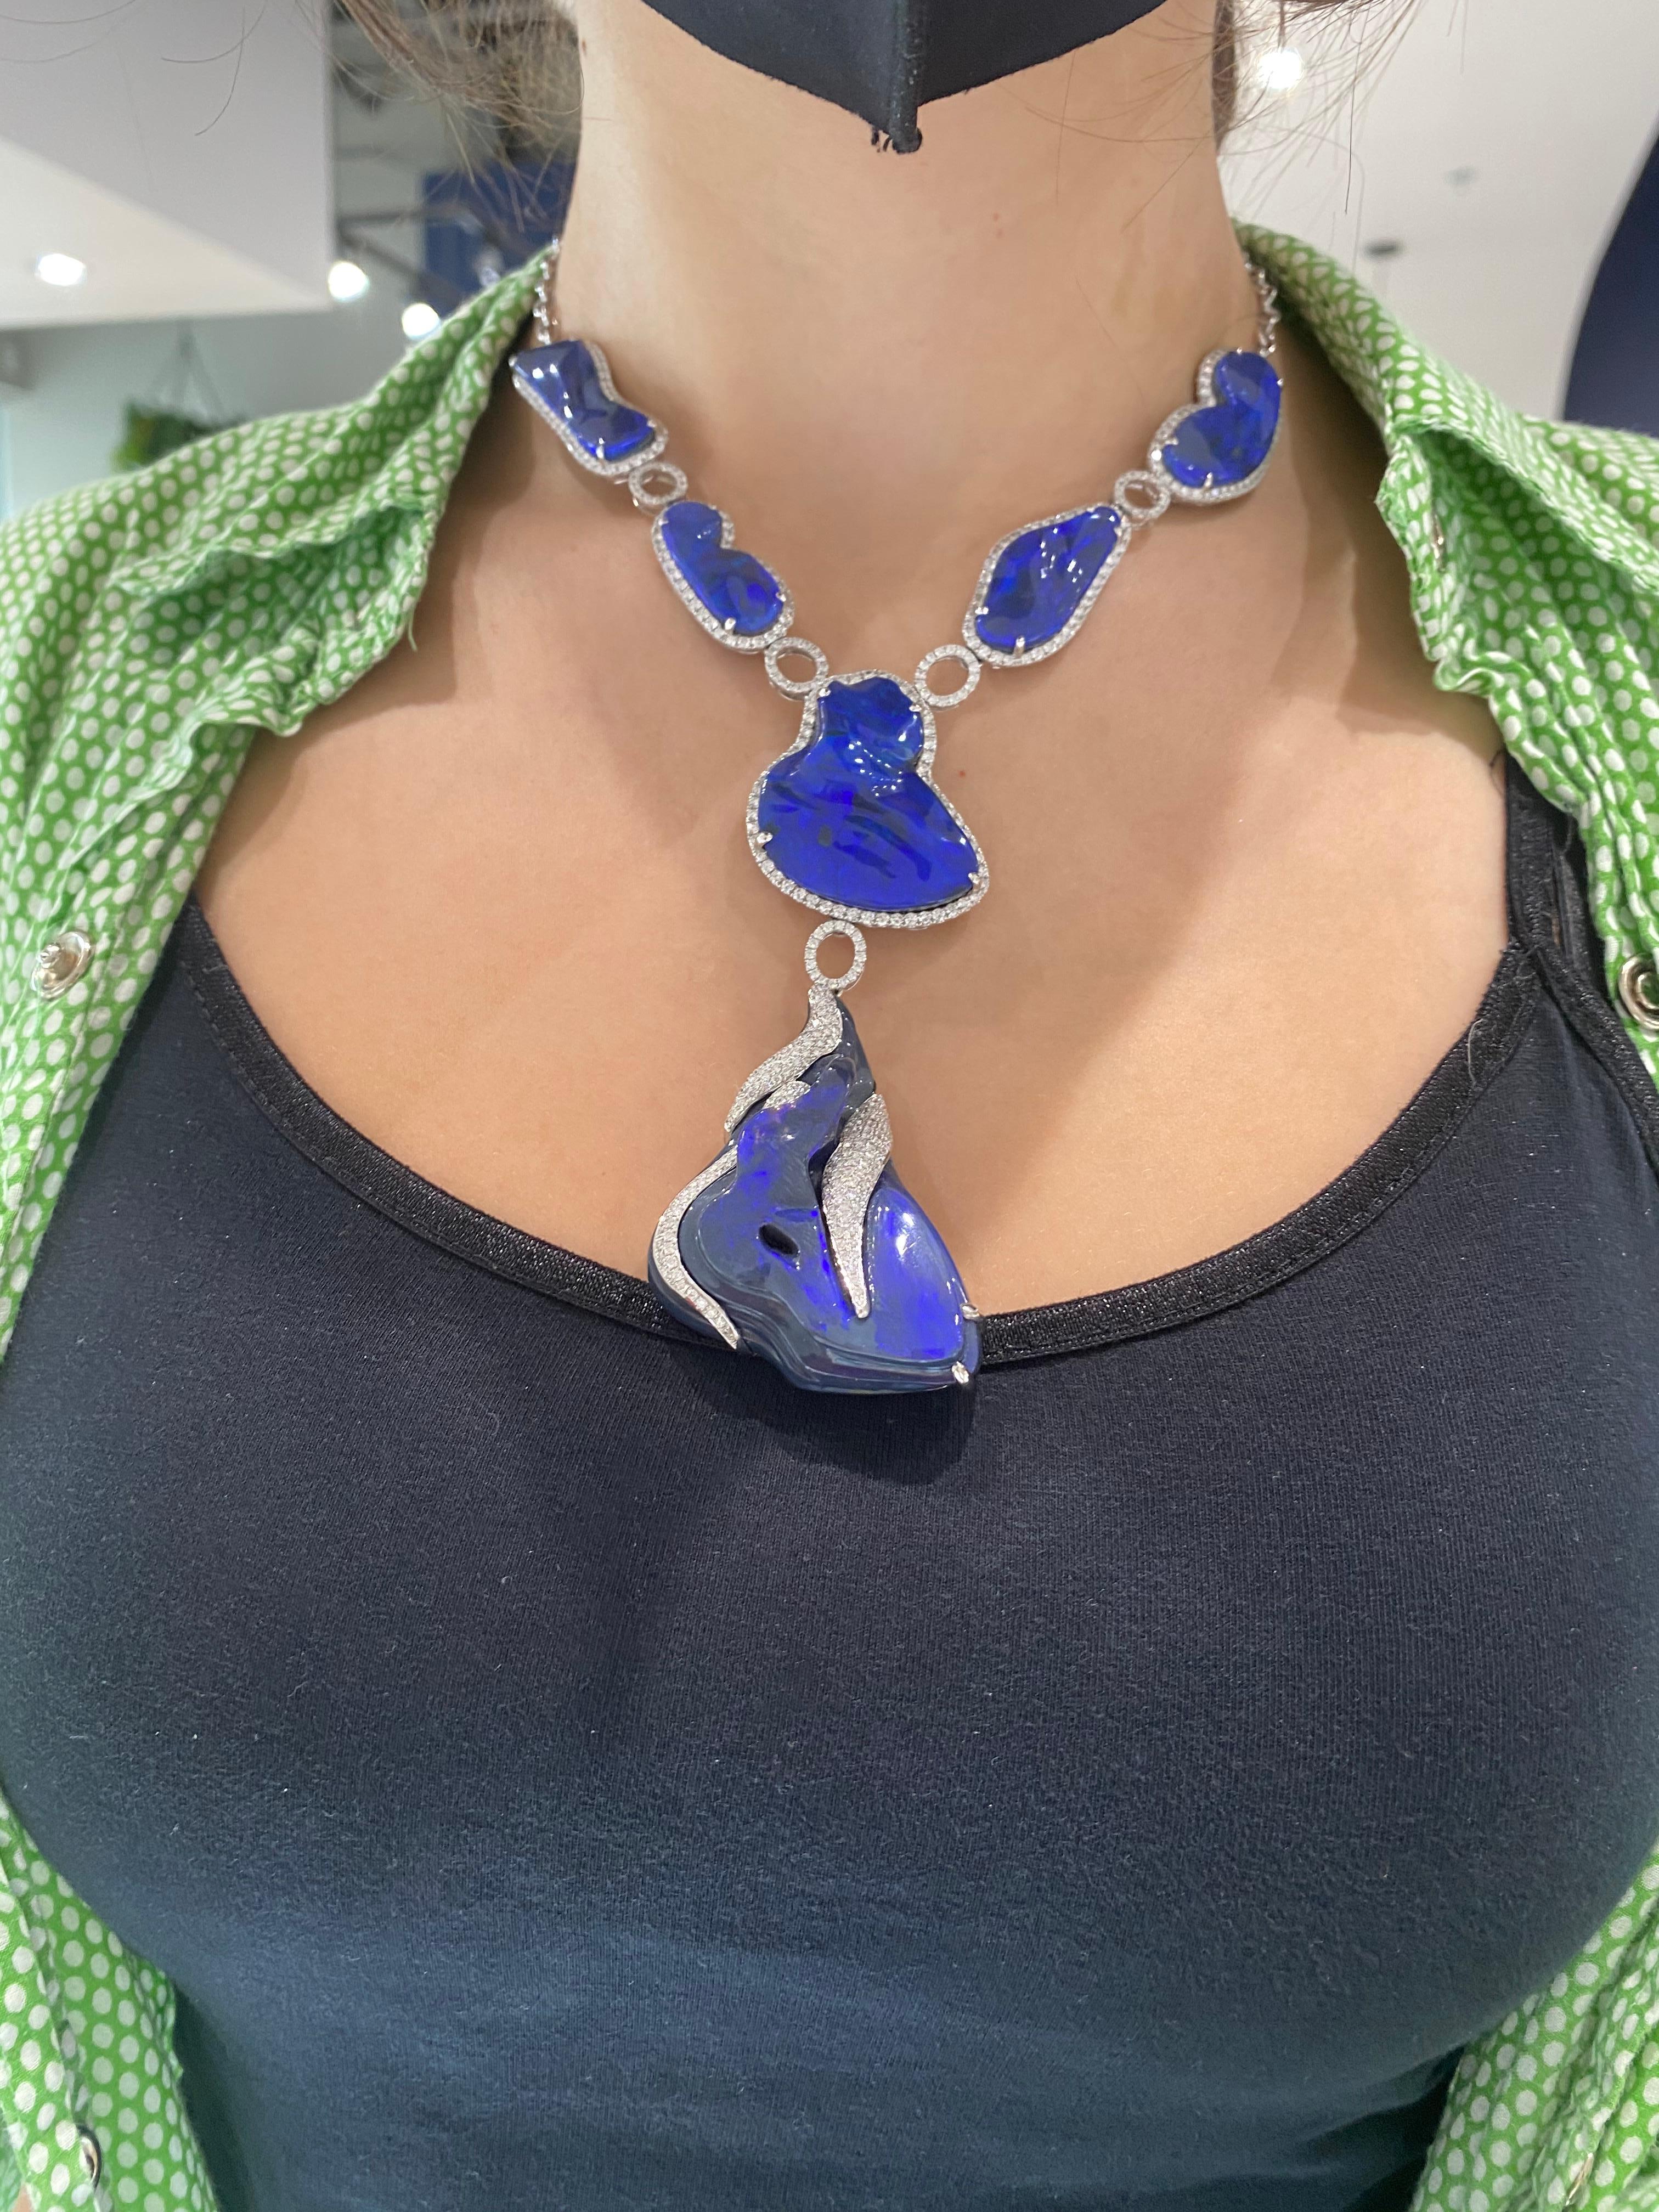 197.00ctw Lightning Ridge Black Opal 6.27ct Diamond AGTA Award Winning Necklace In New Condition For Sale In Houston, TX